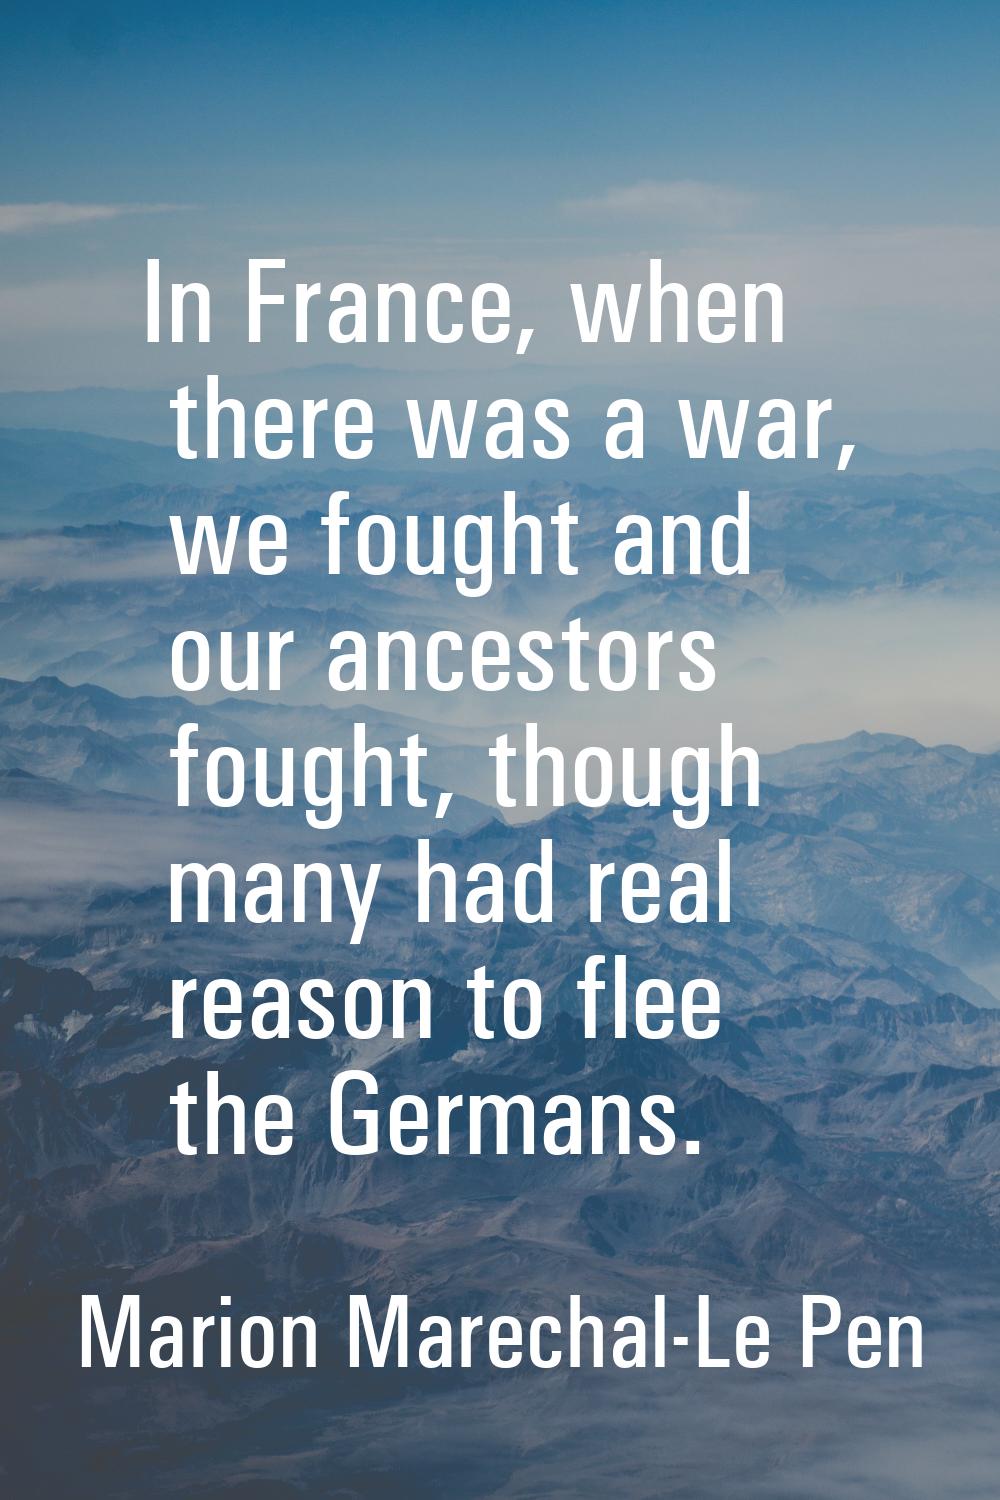 In France, when there was a war, we fought and our ancestors fought, though many had real reason to